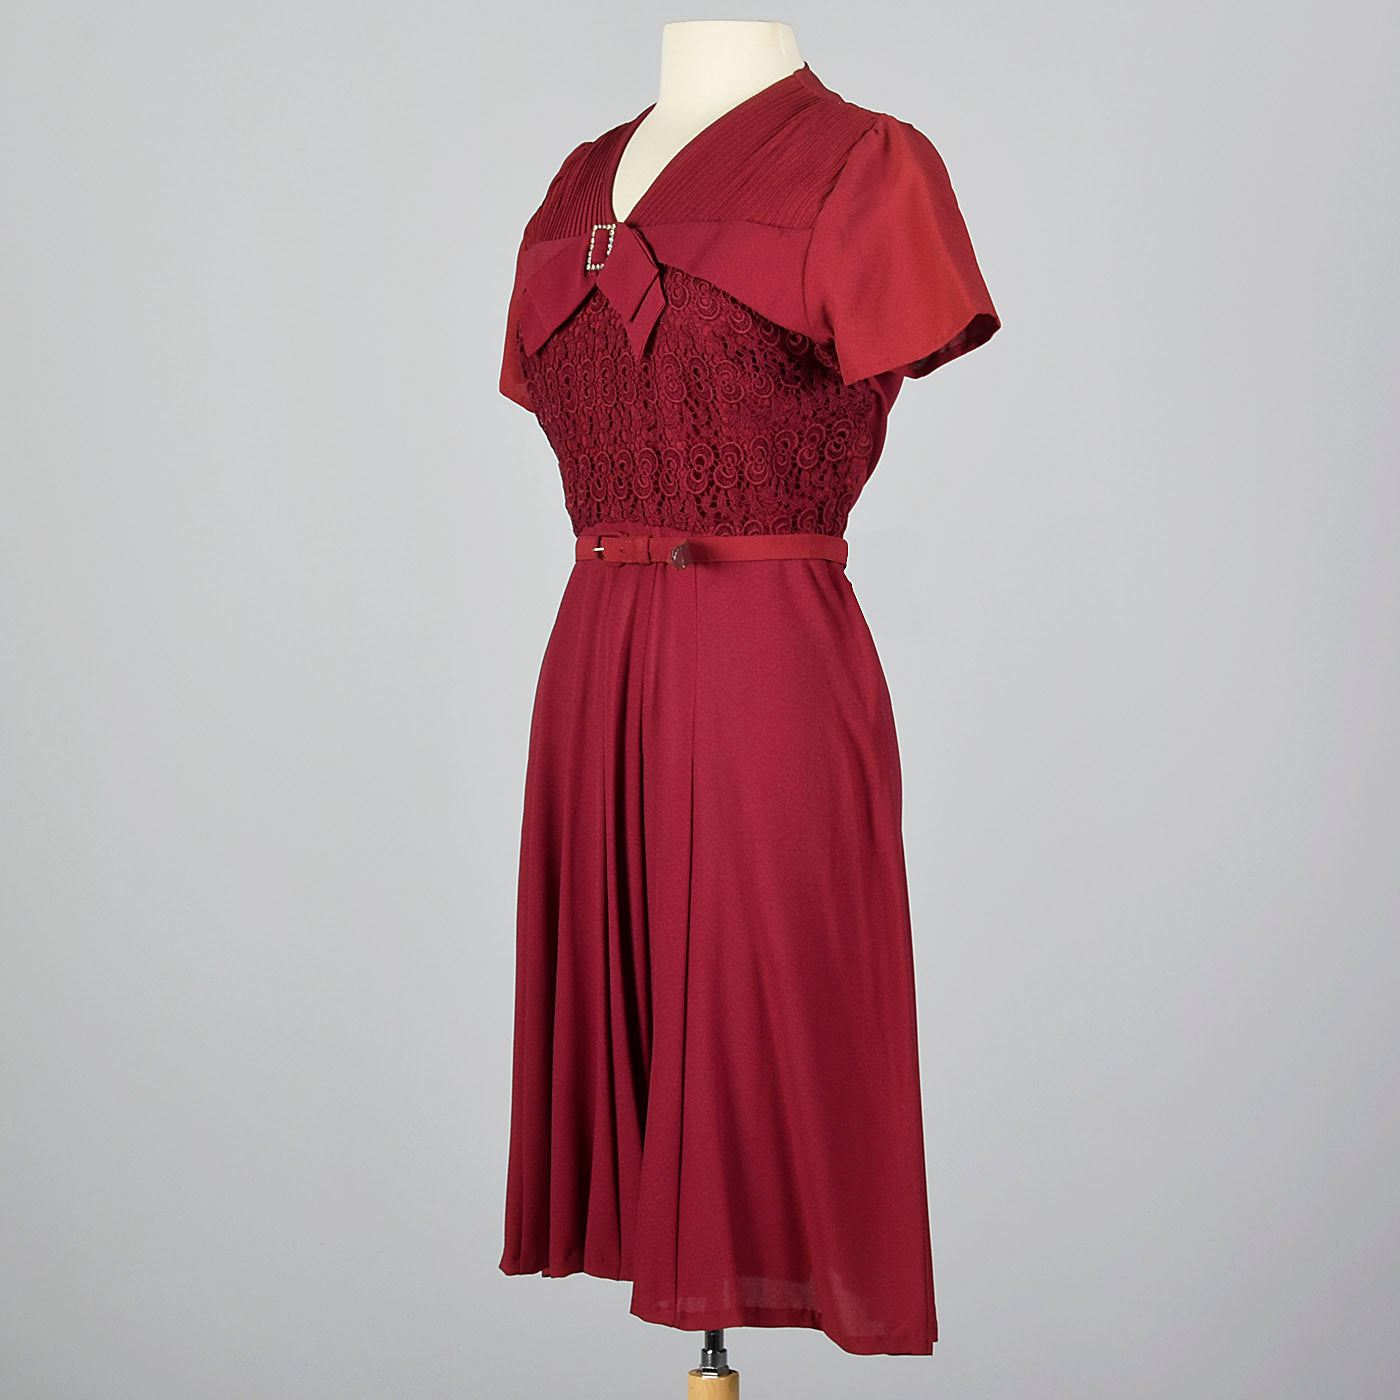 1950s Burgundy Dress with Lace Overlay